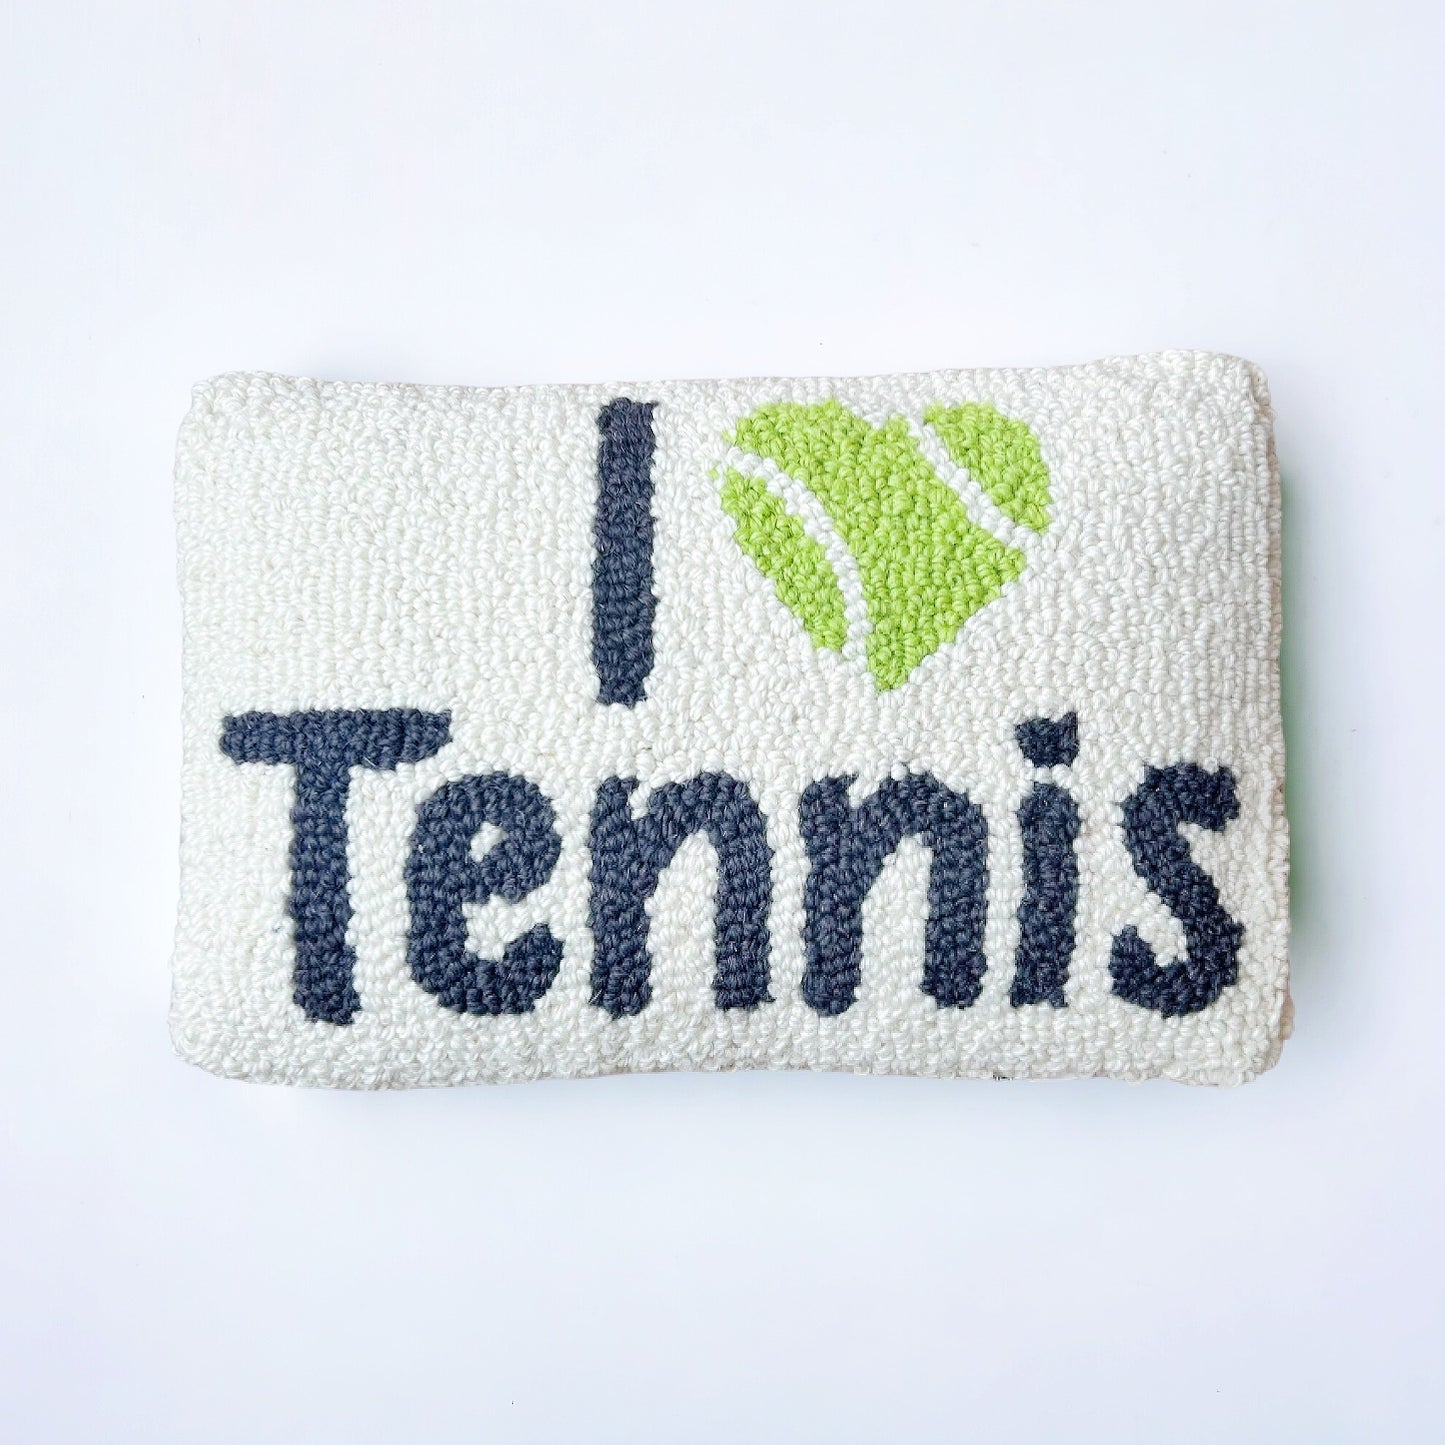 "I ♥ Tennis" Hooked Pillow